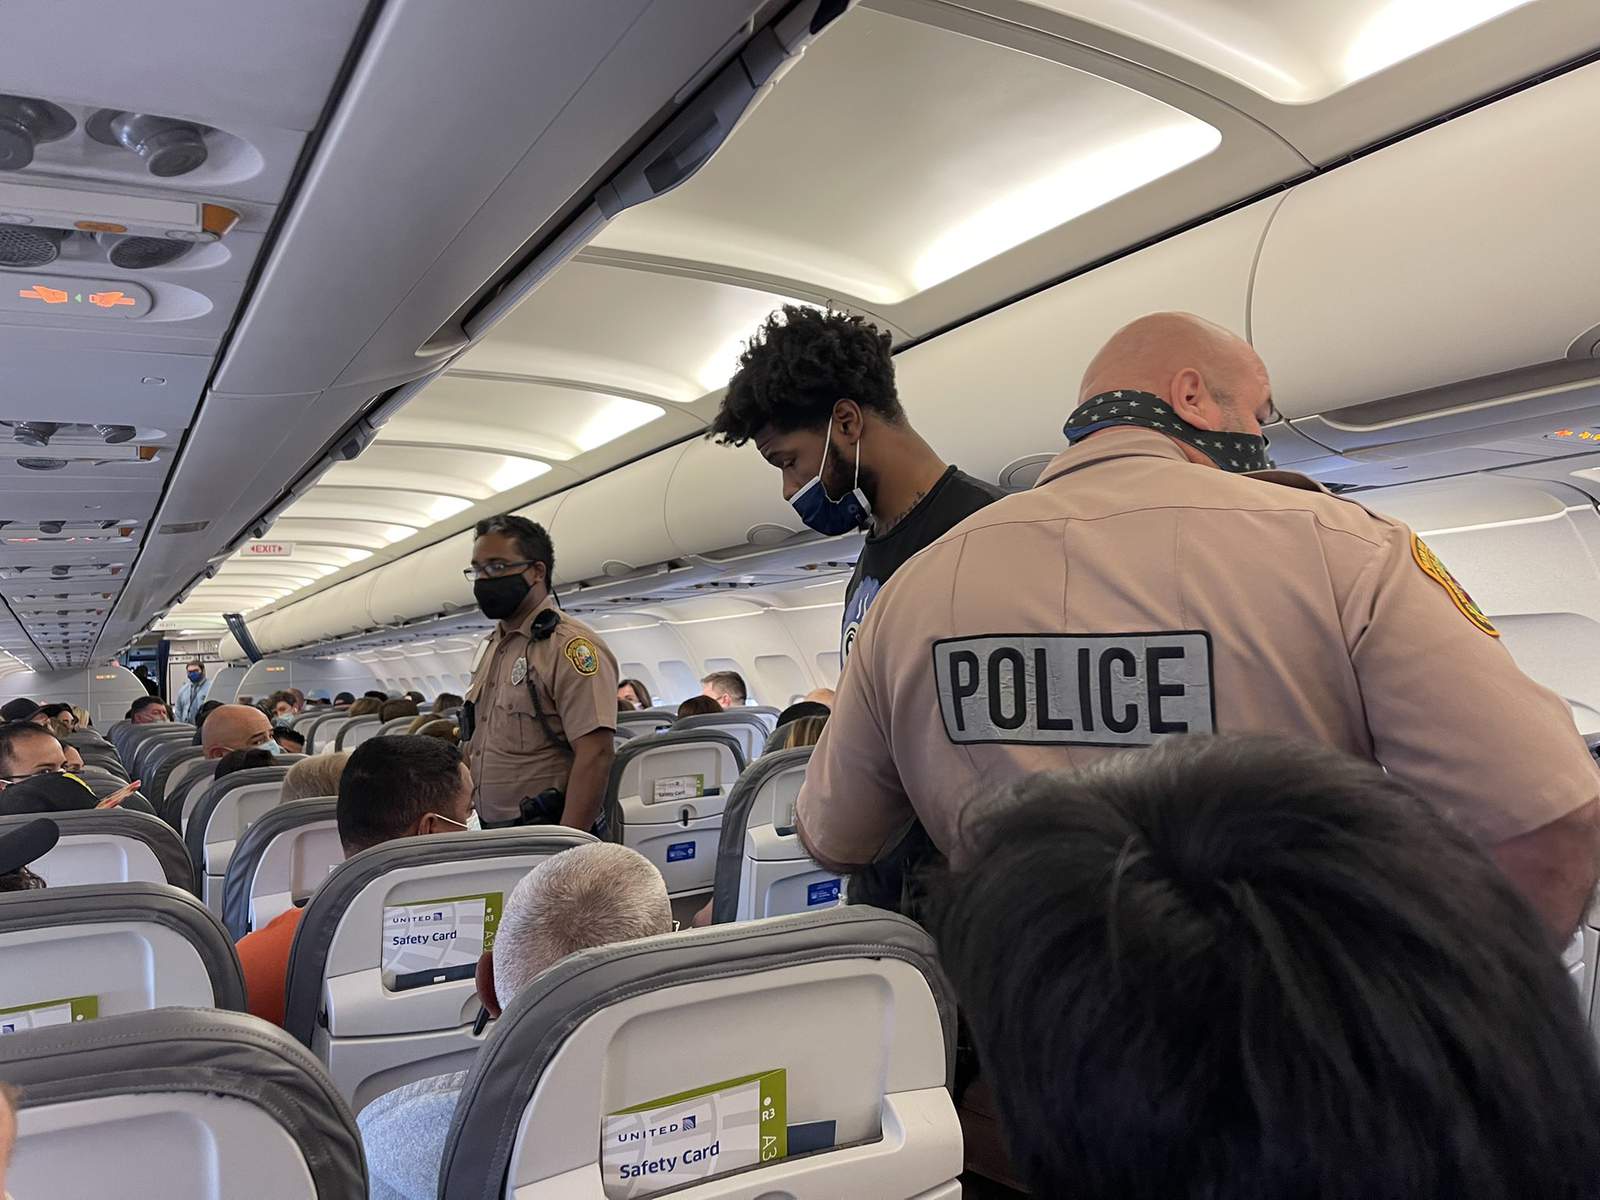 Former FSU football star says he was called racial slur on Miami flight, almost falsely arrested